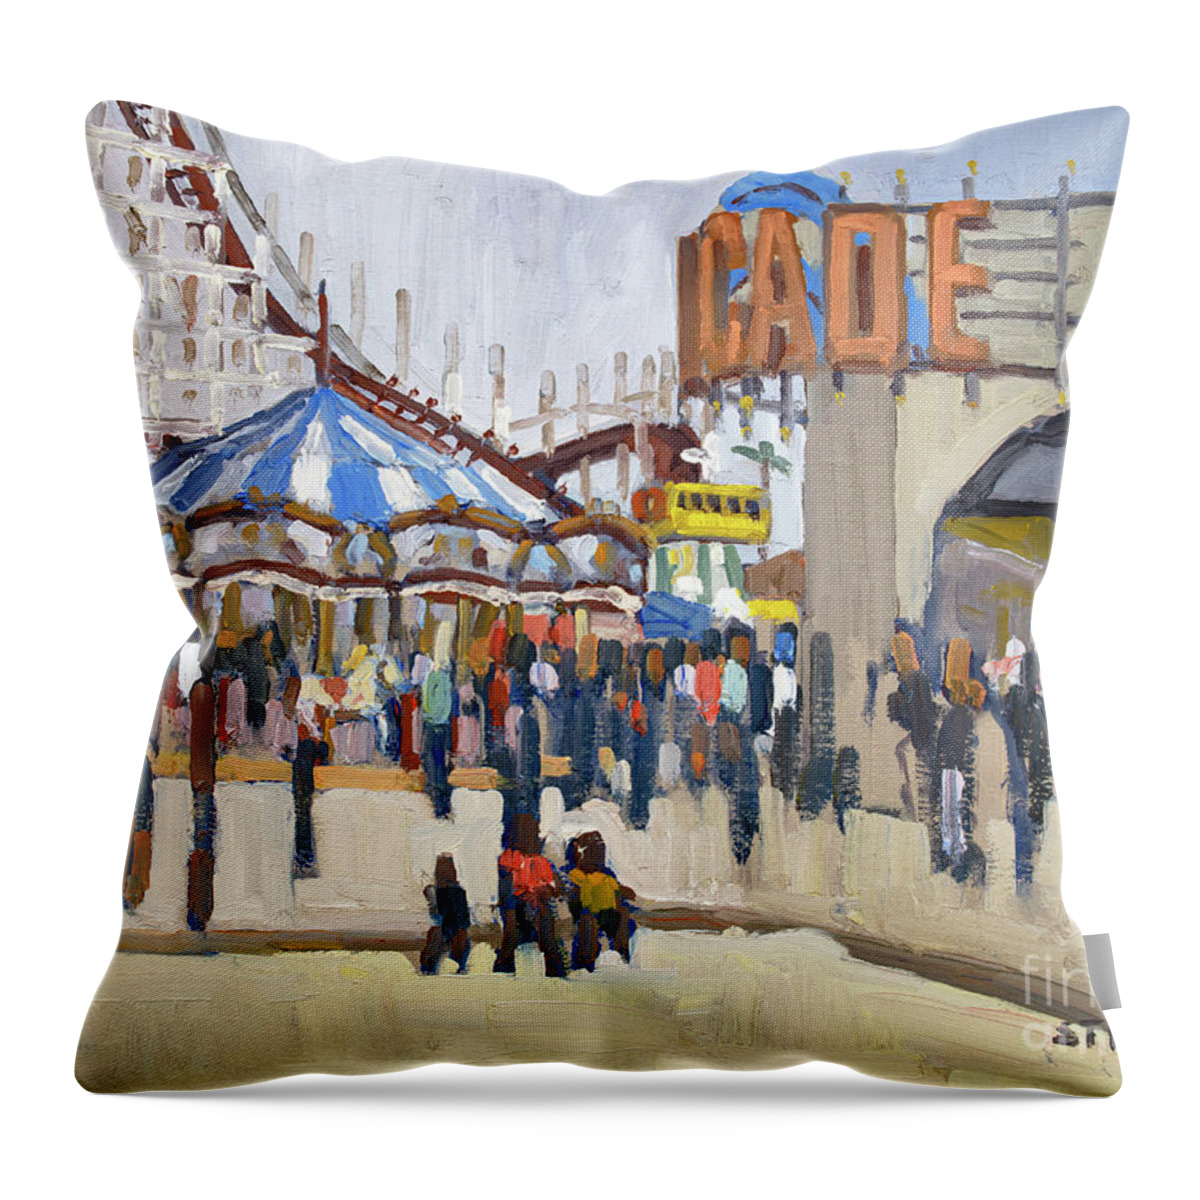 Belmont Park Throw Pillow featuring the painting Belmont Park, Mission Beach - San Diego, California by Paul Strahm